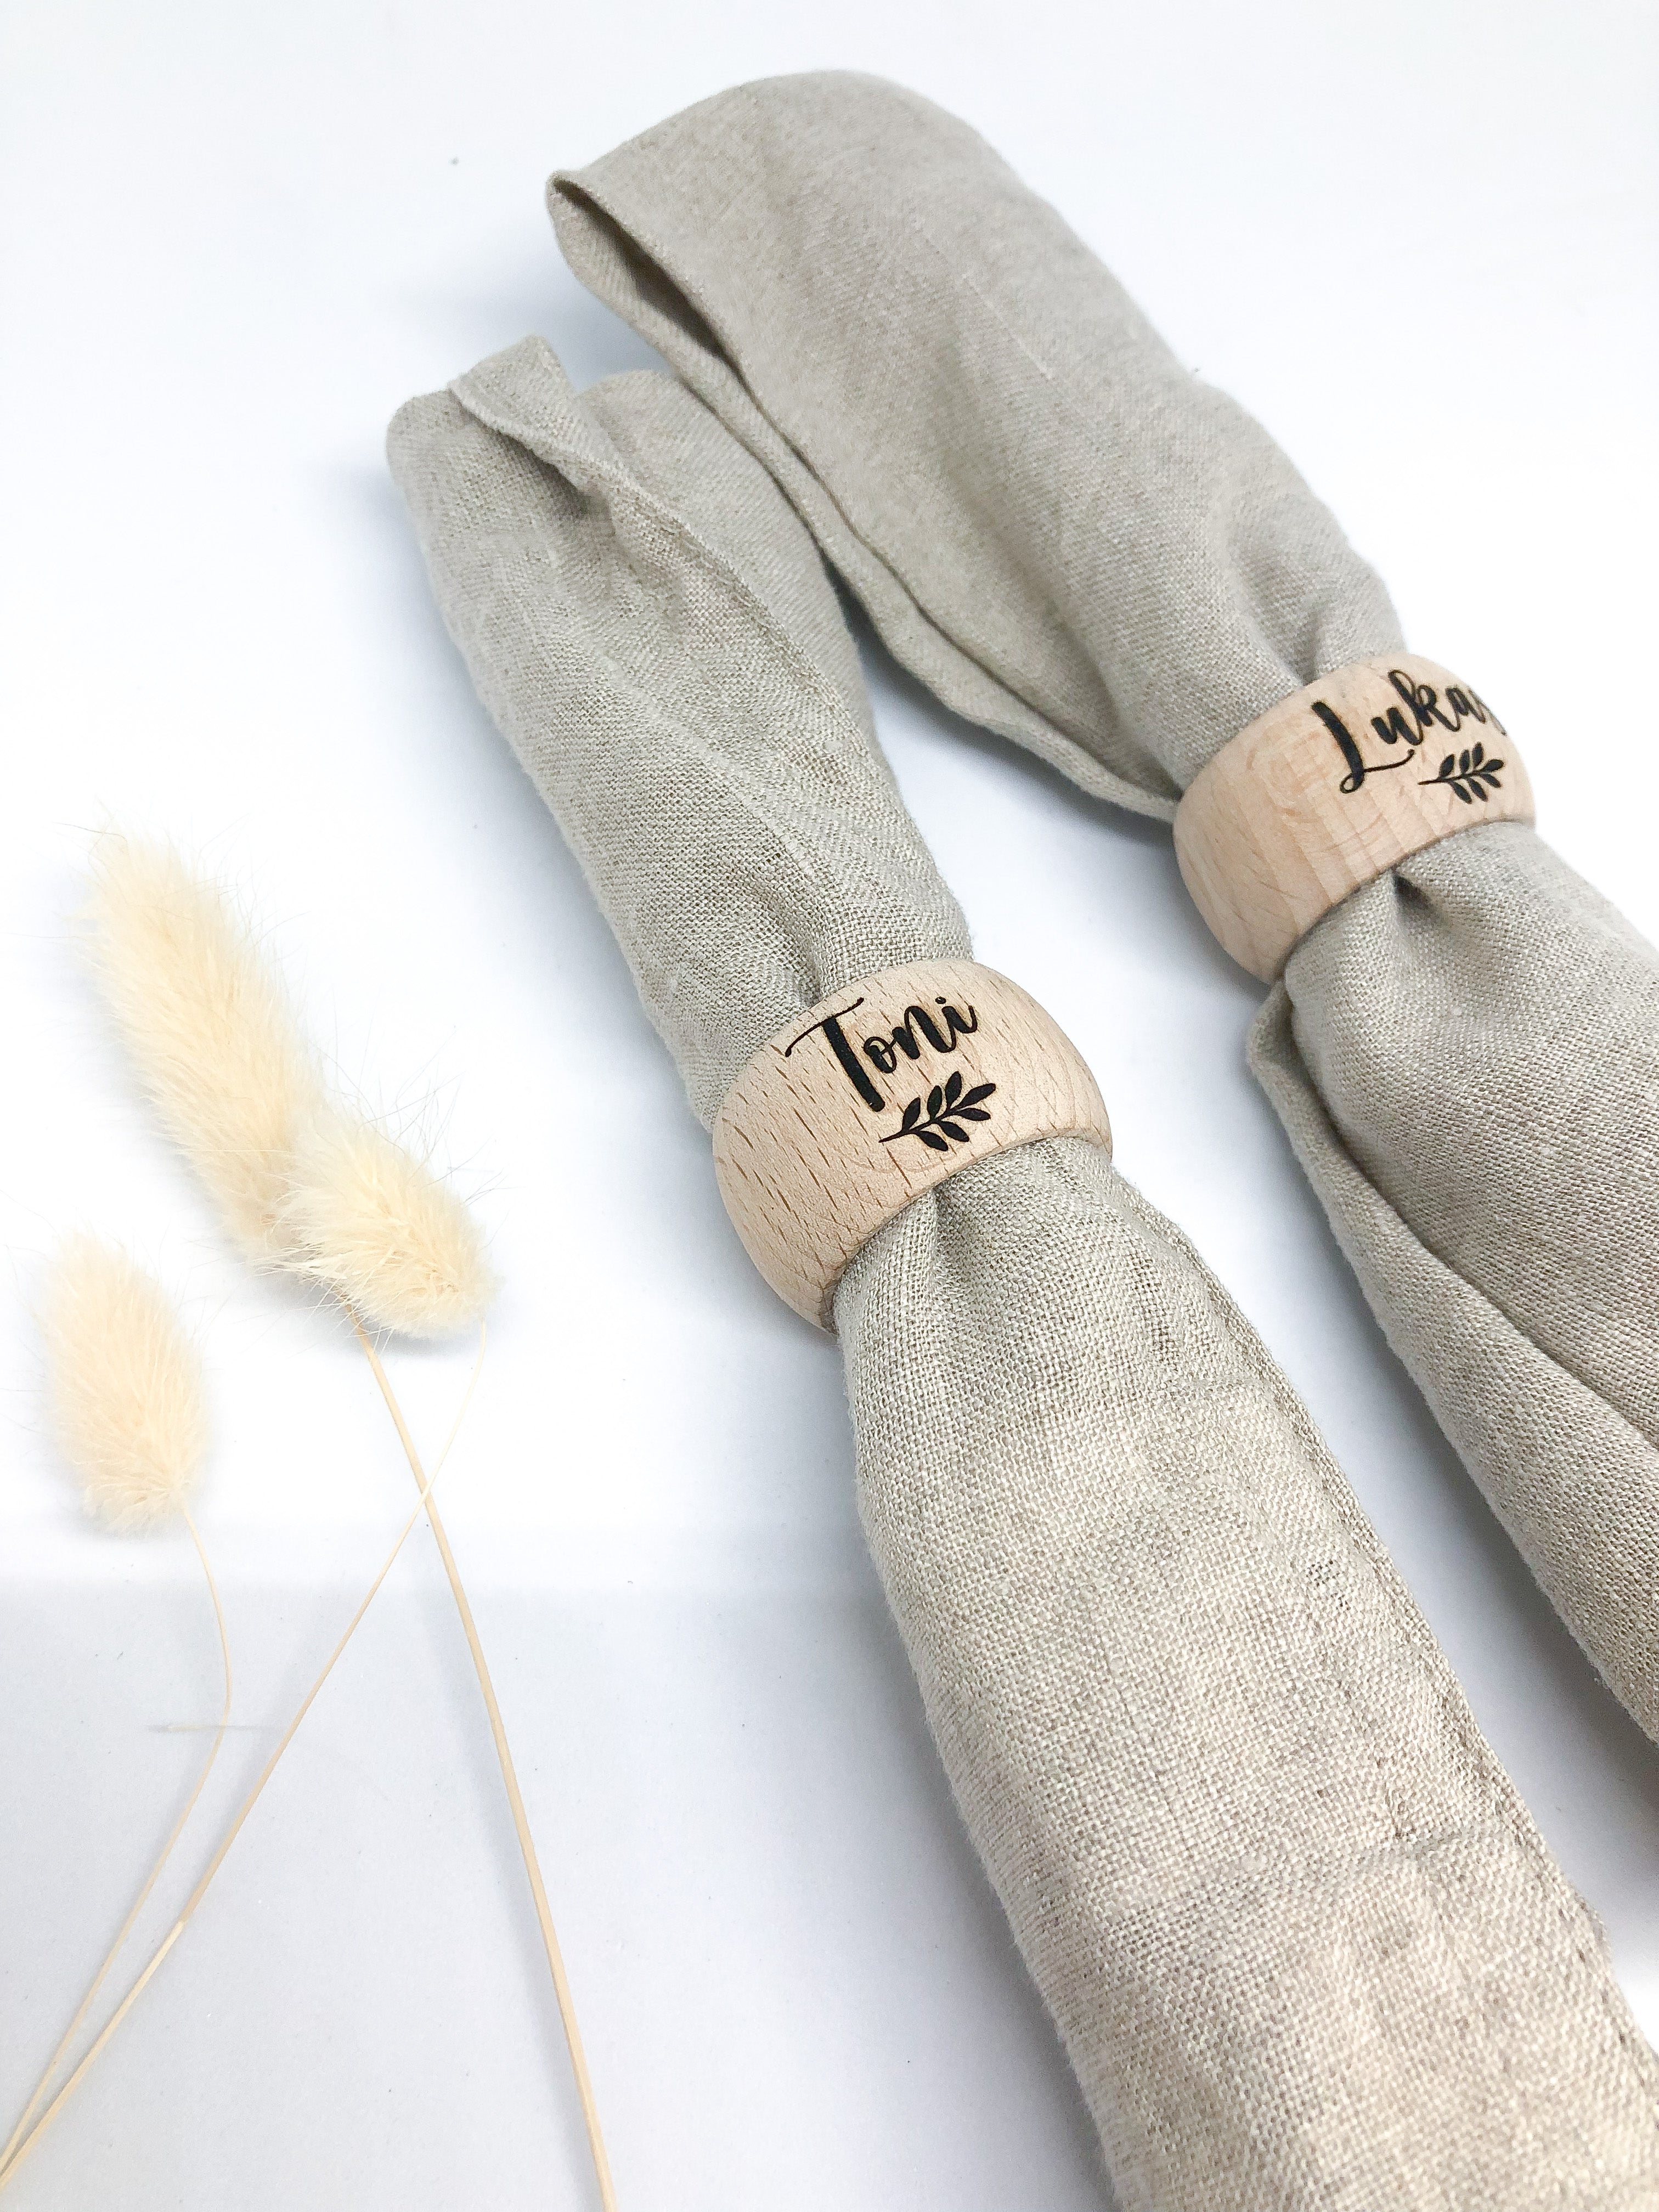 Personalized wooden napkin ring with leaf